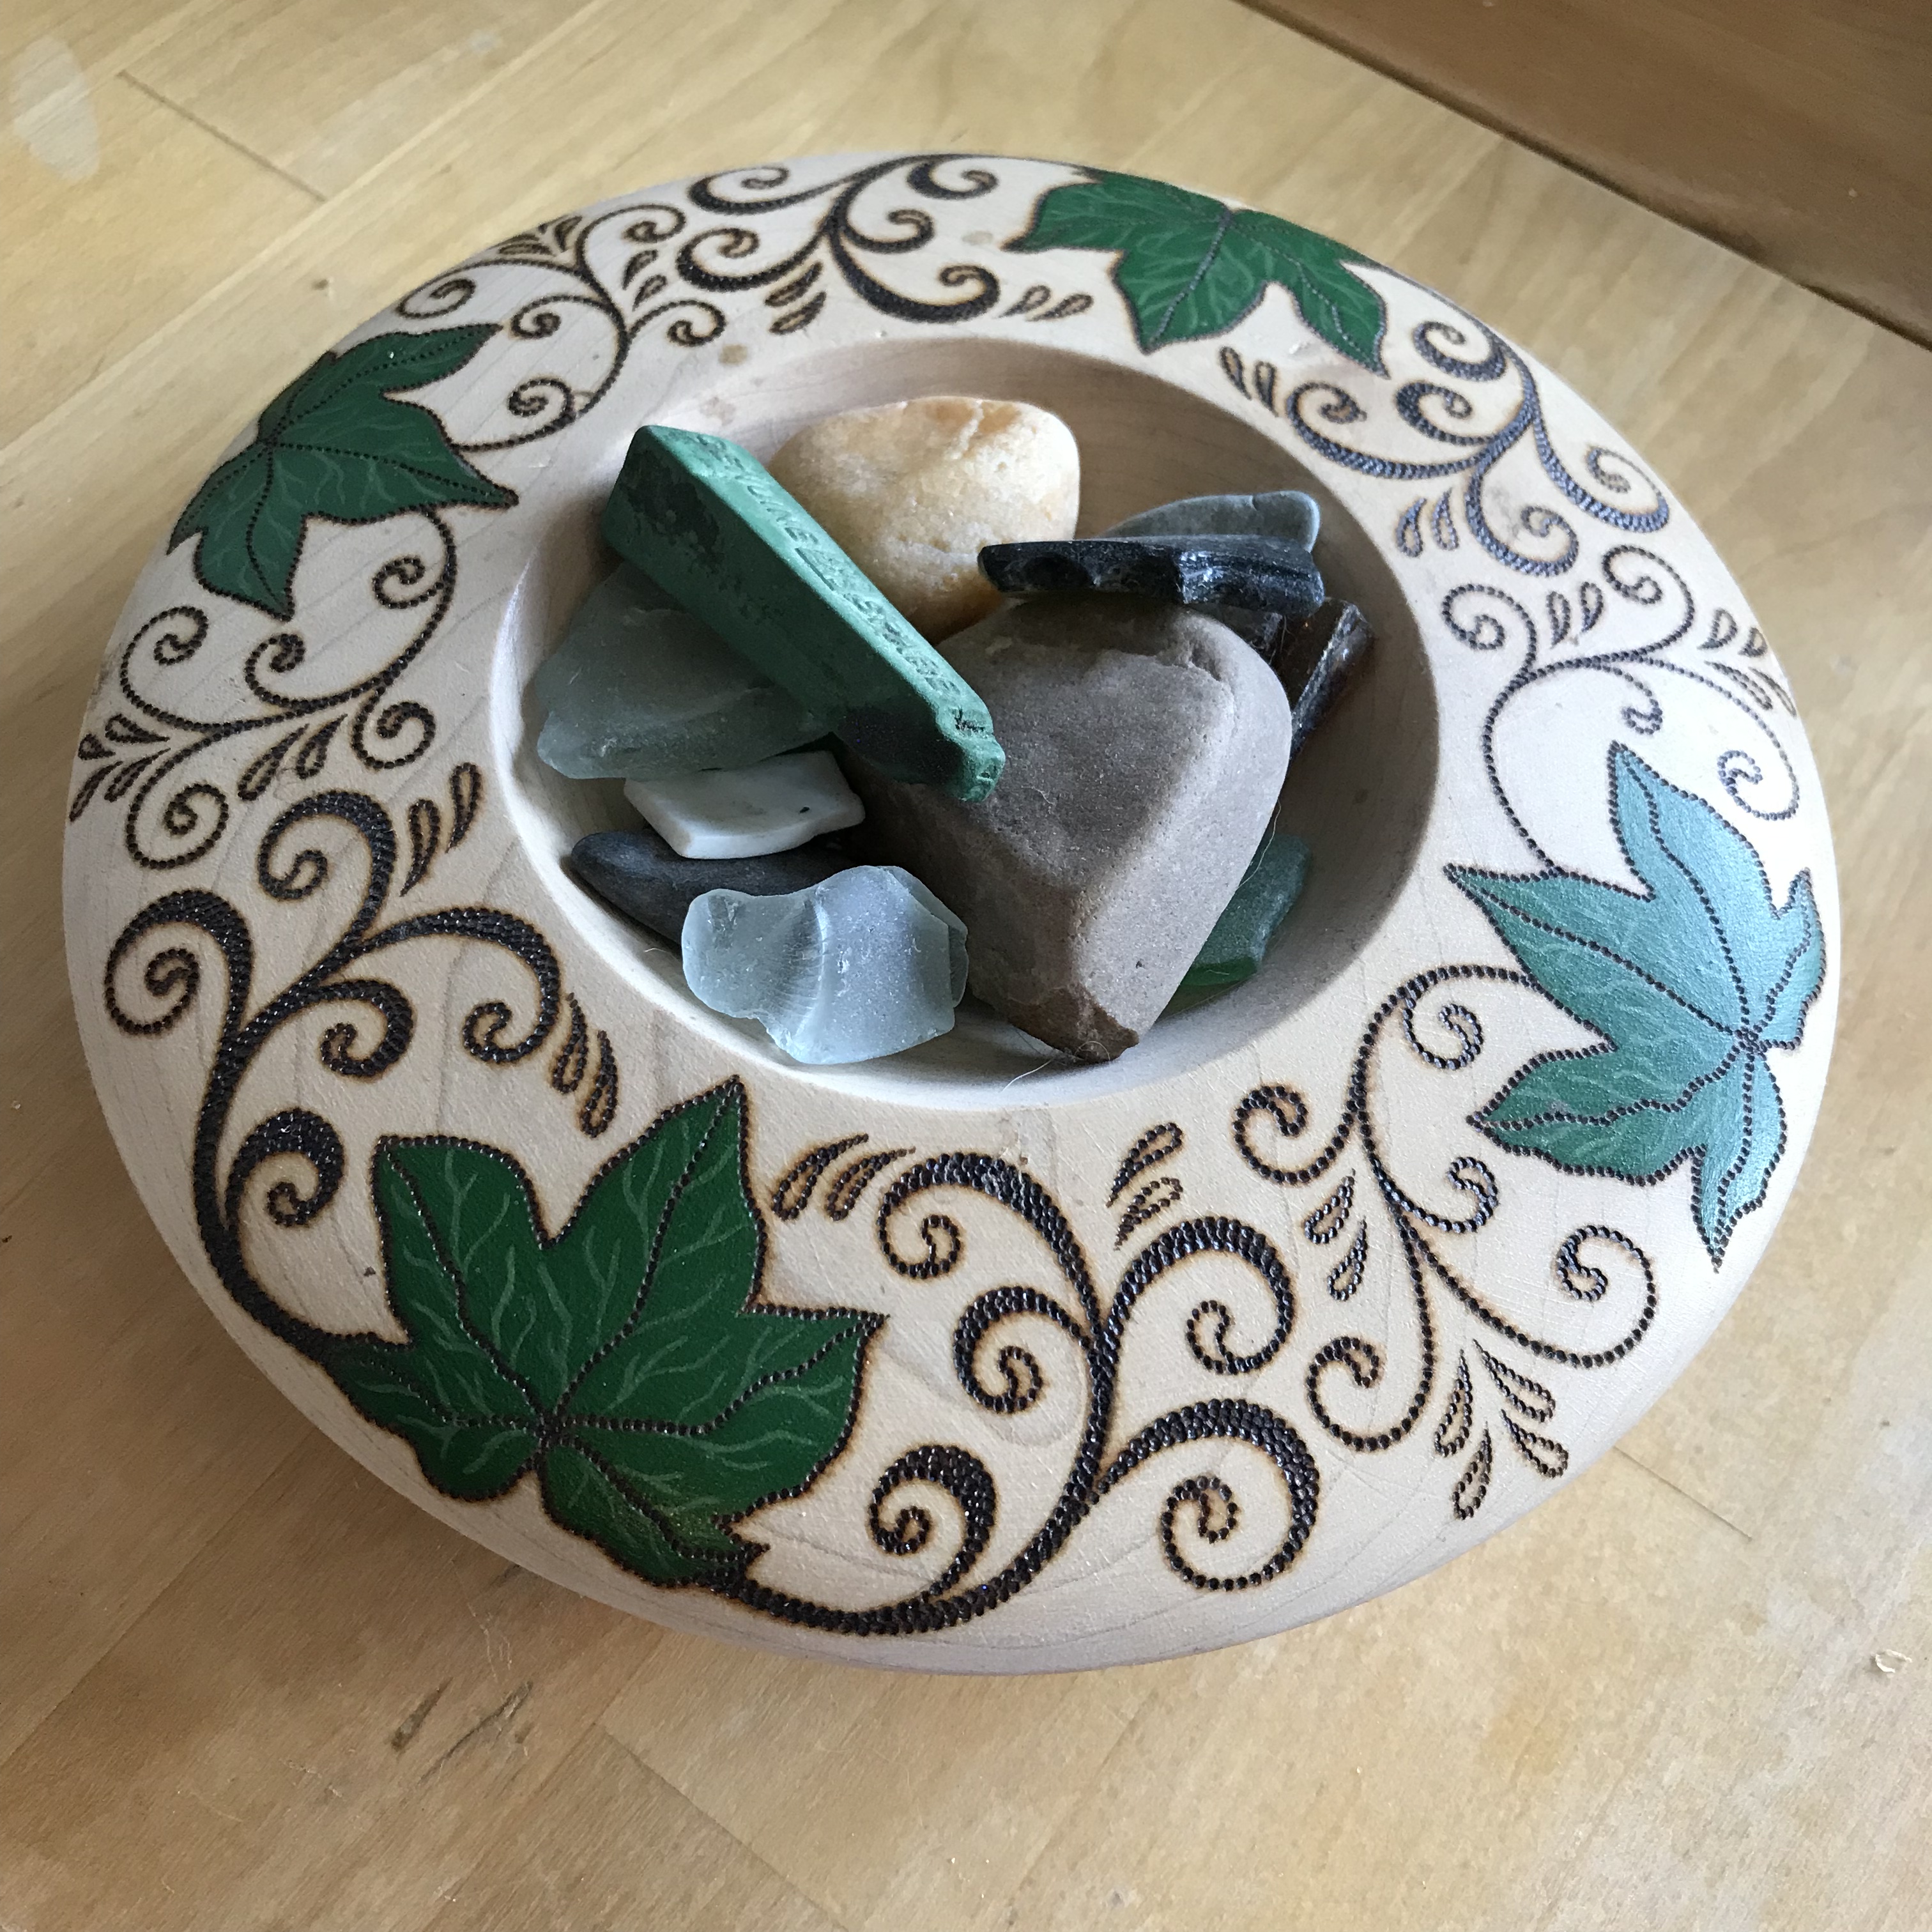 Handmade Haven, Sylvan Stories, Pyrography, Ivy leaves, wooden bowl